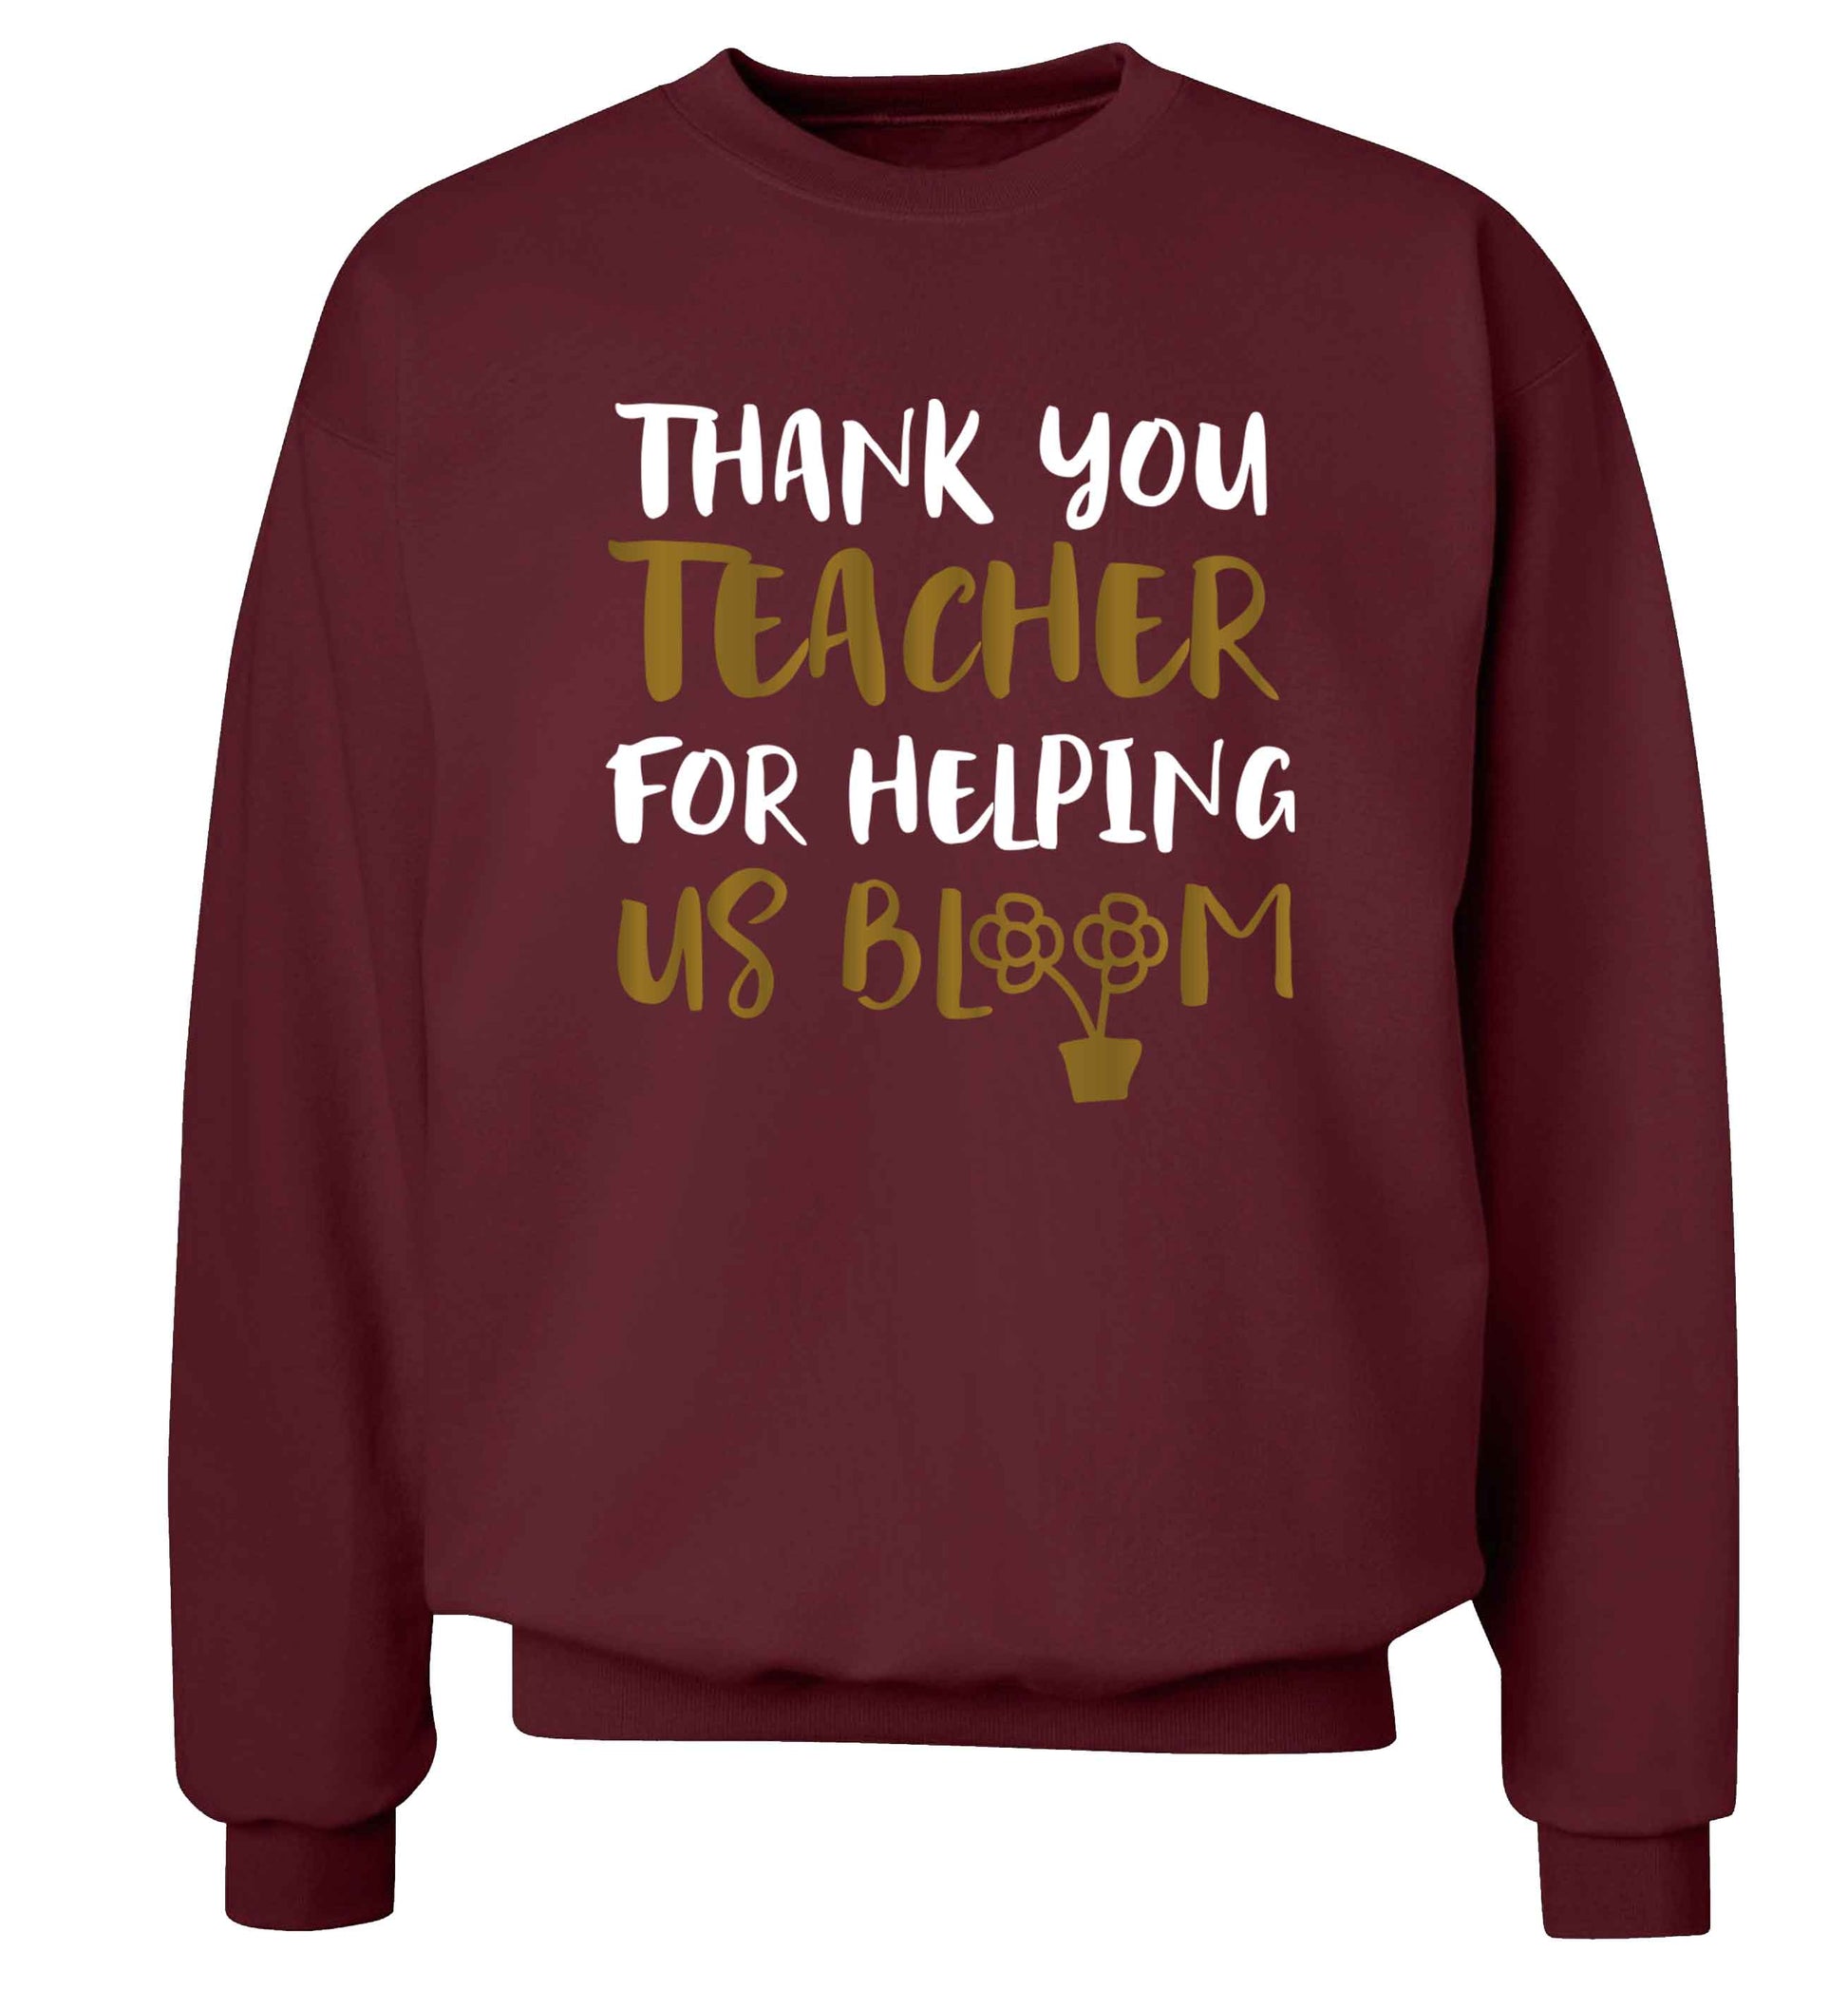 Thank you teacher for helping us bloom Adult's unisex maroon Sweater 2XL